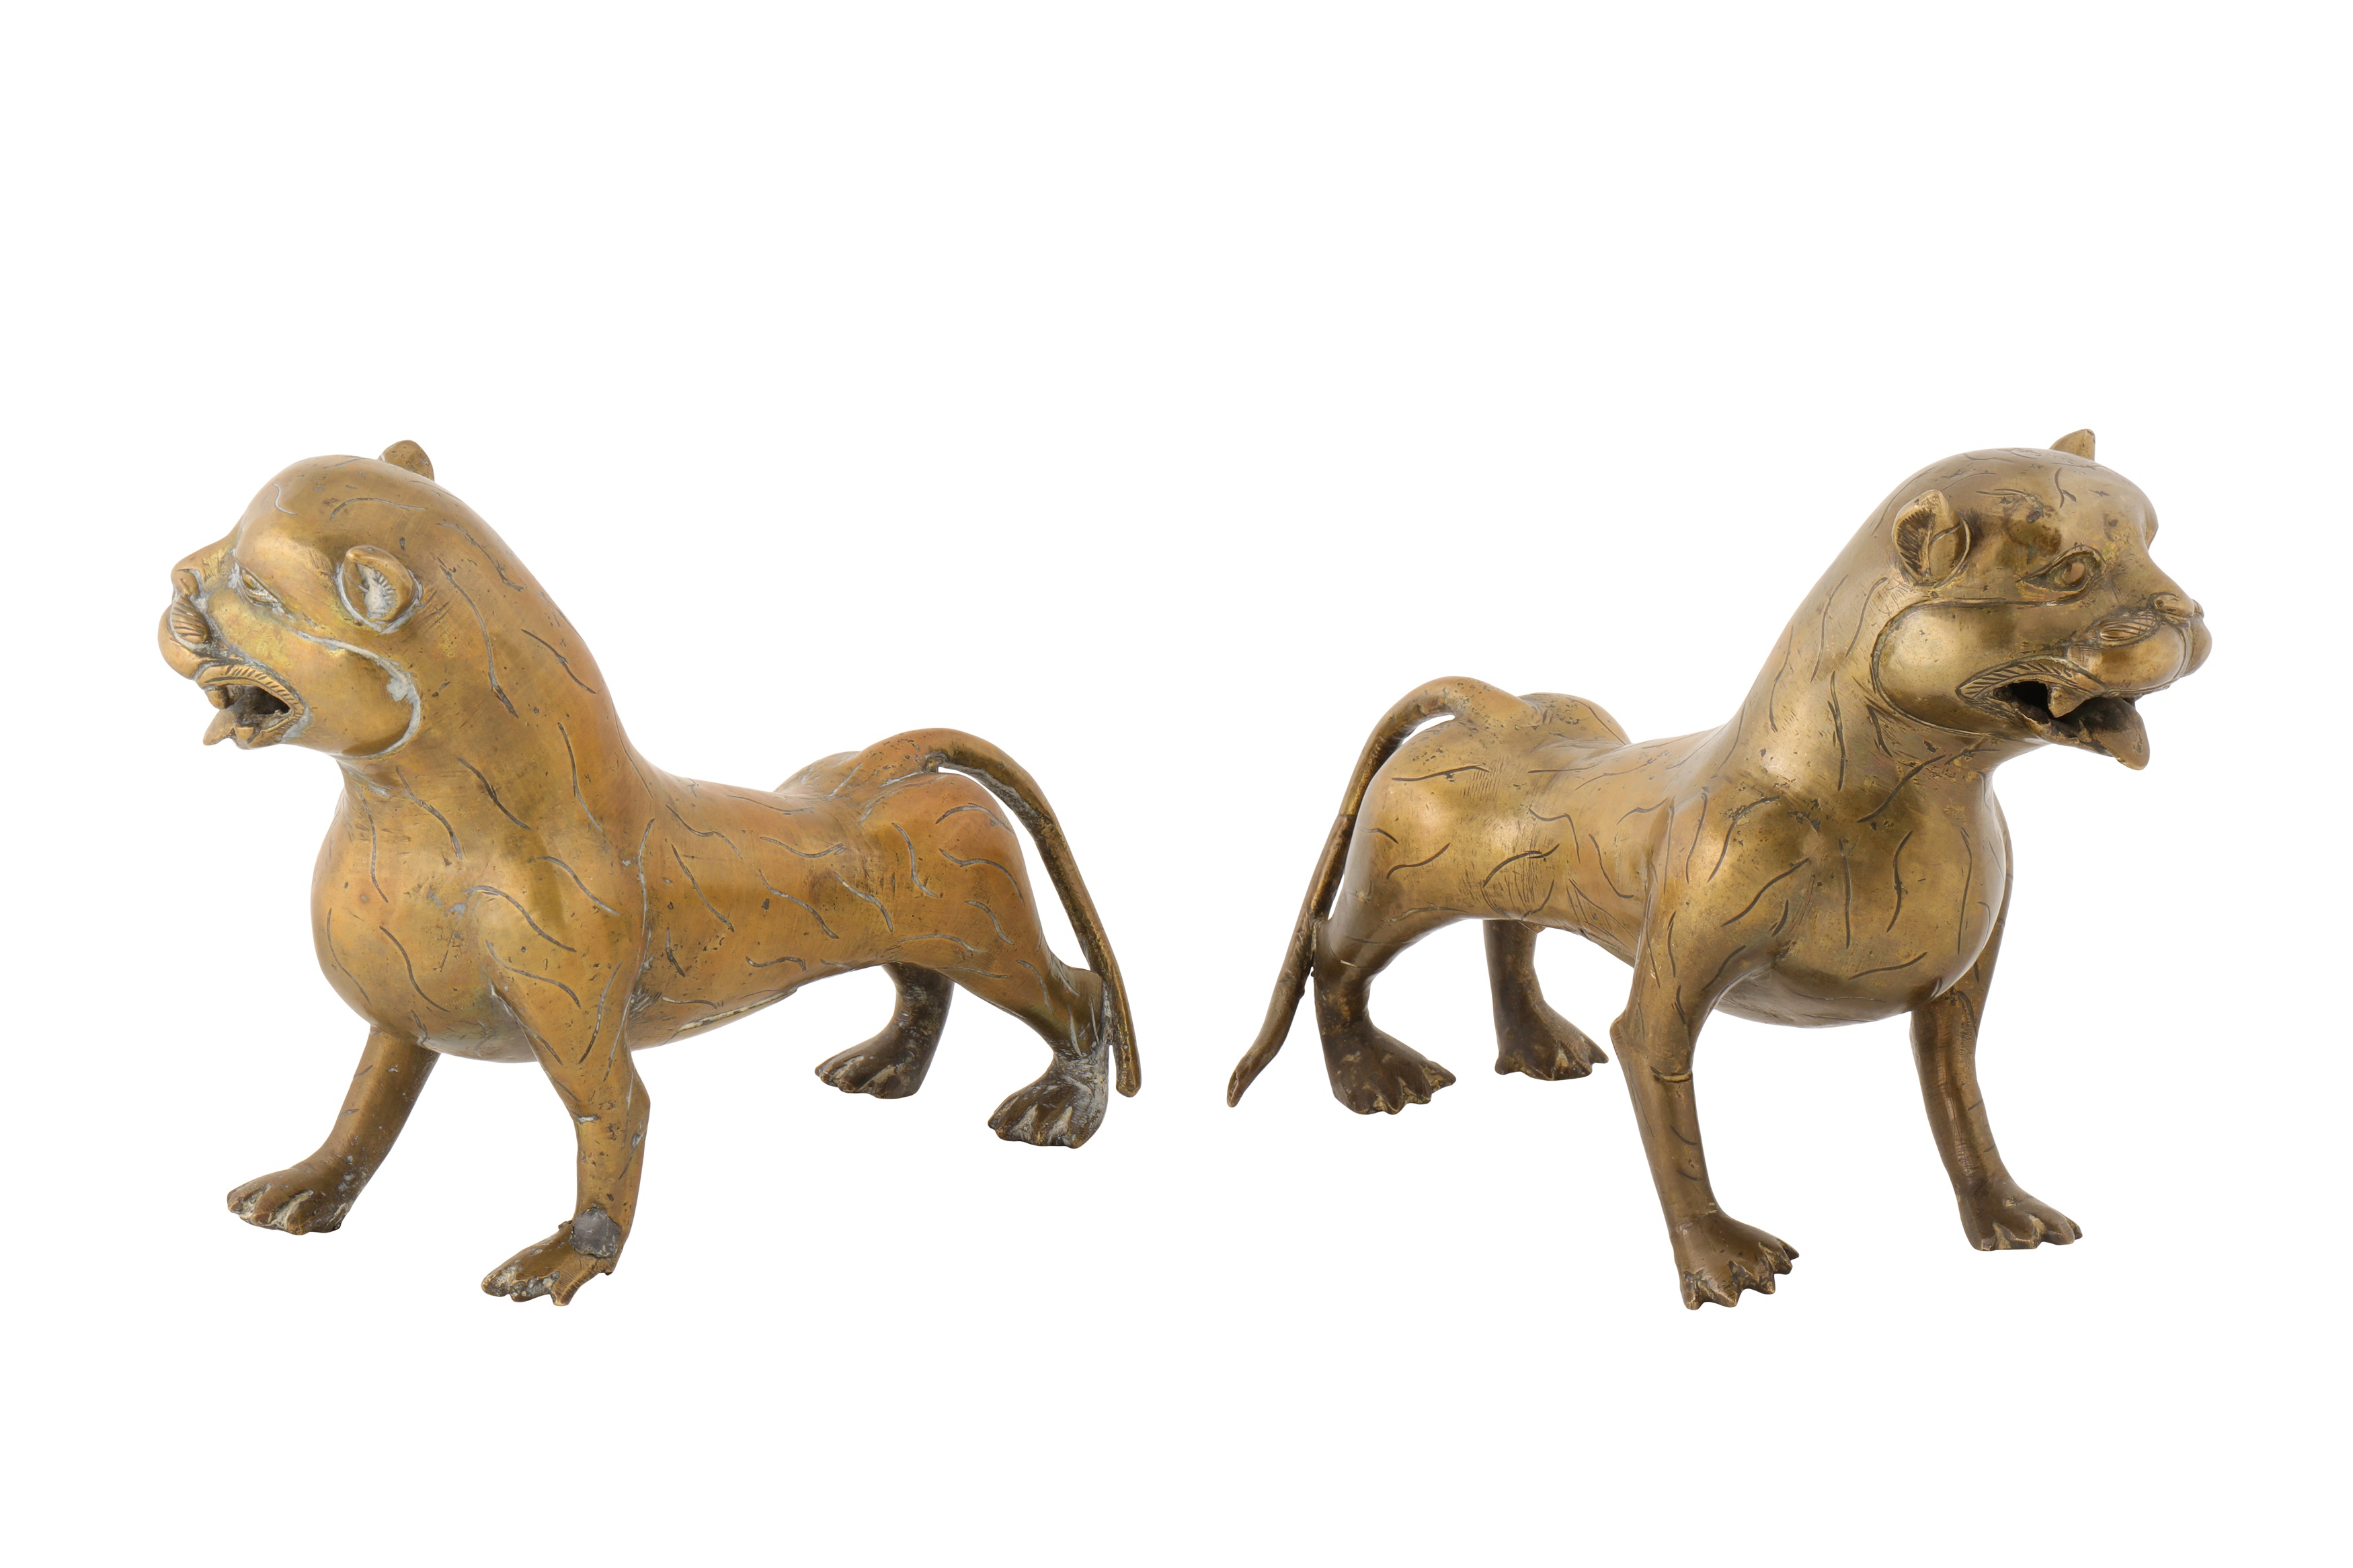 A PAIR OF 18TH CENTURY DECCAN BRONZE MODELS OF TIGERS - Image 3 of 3